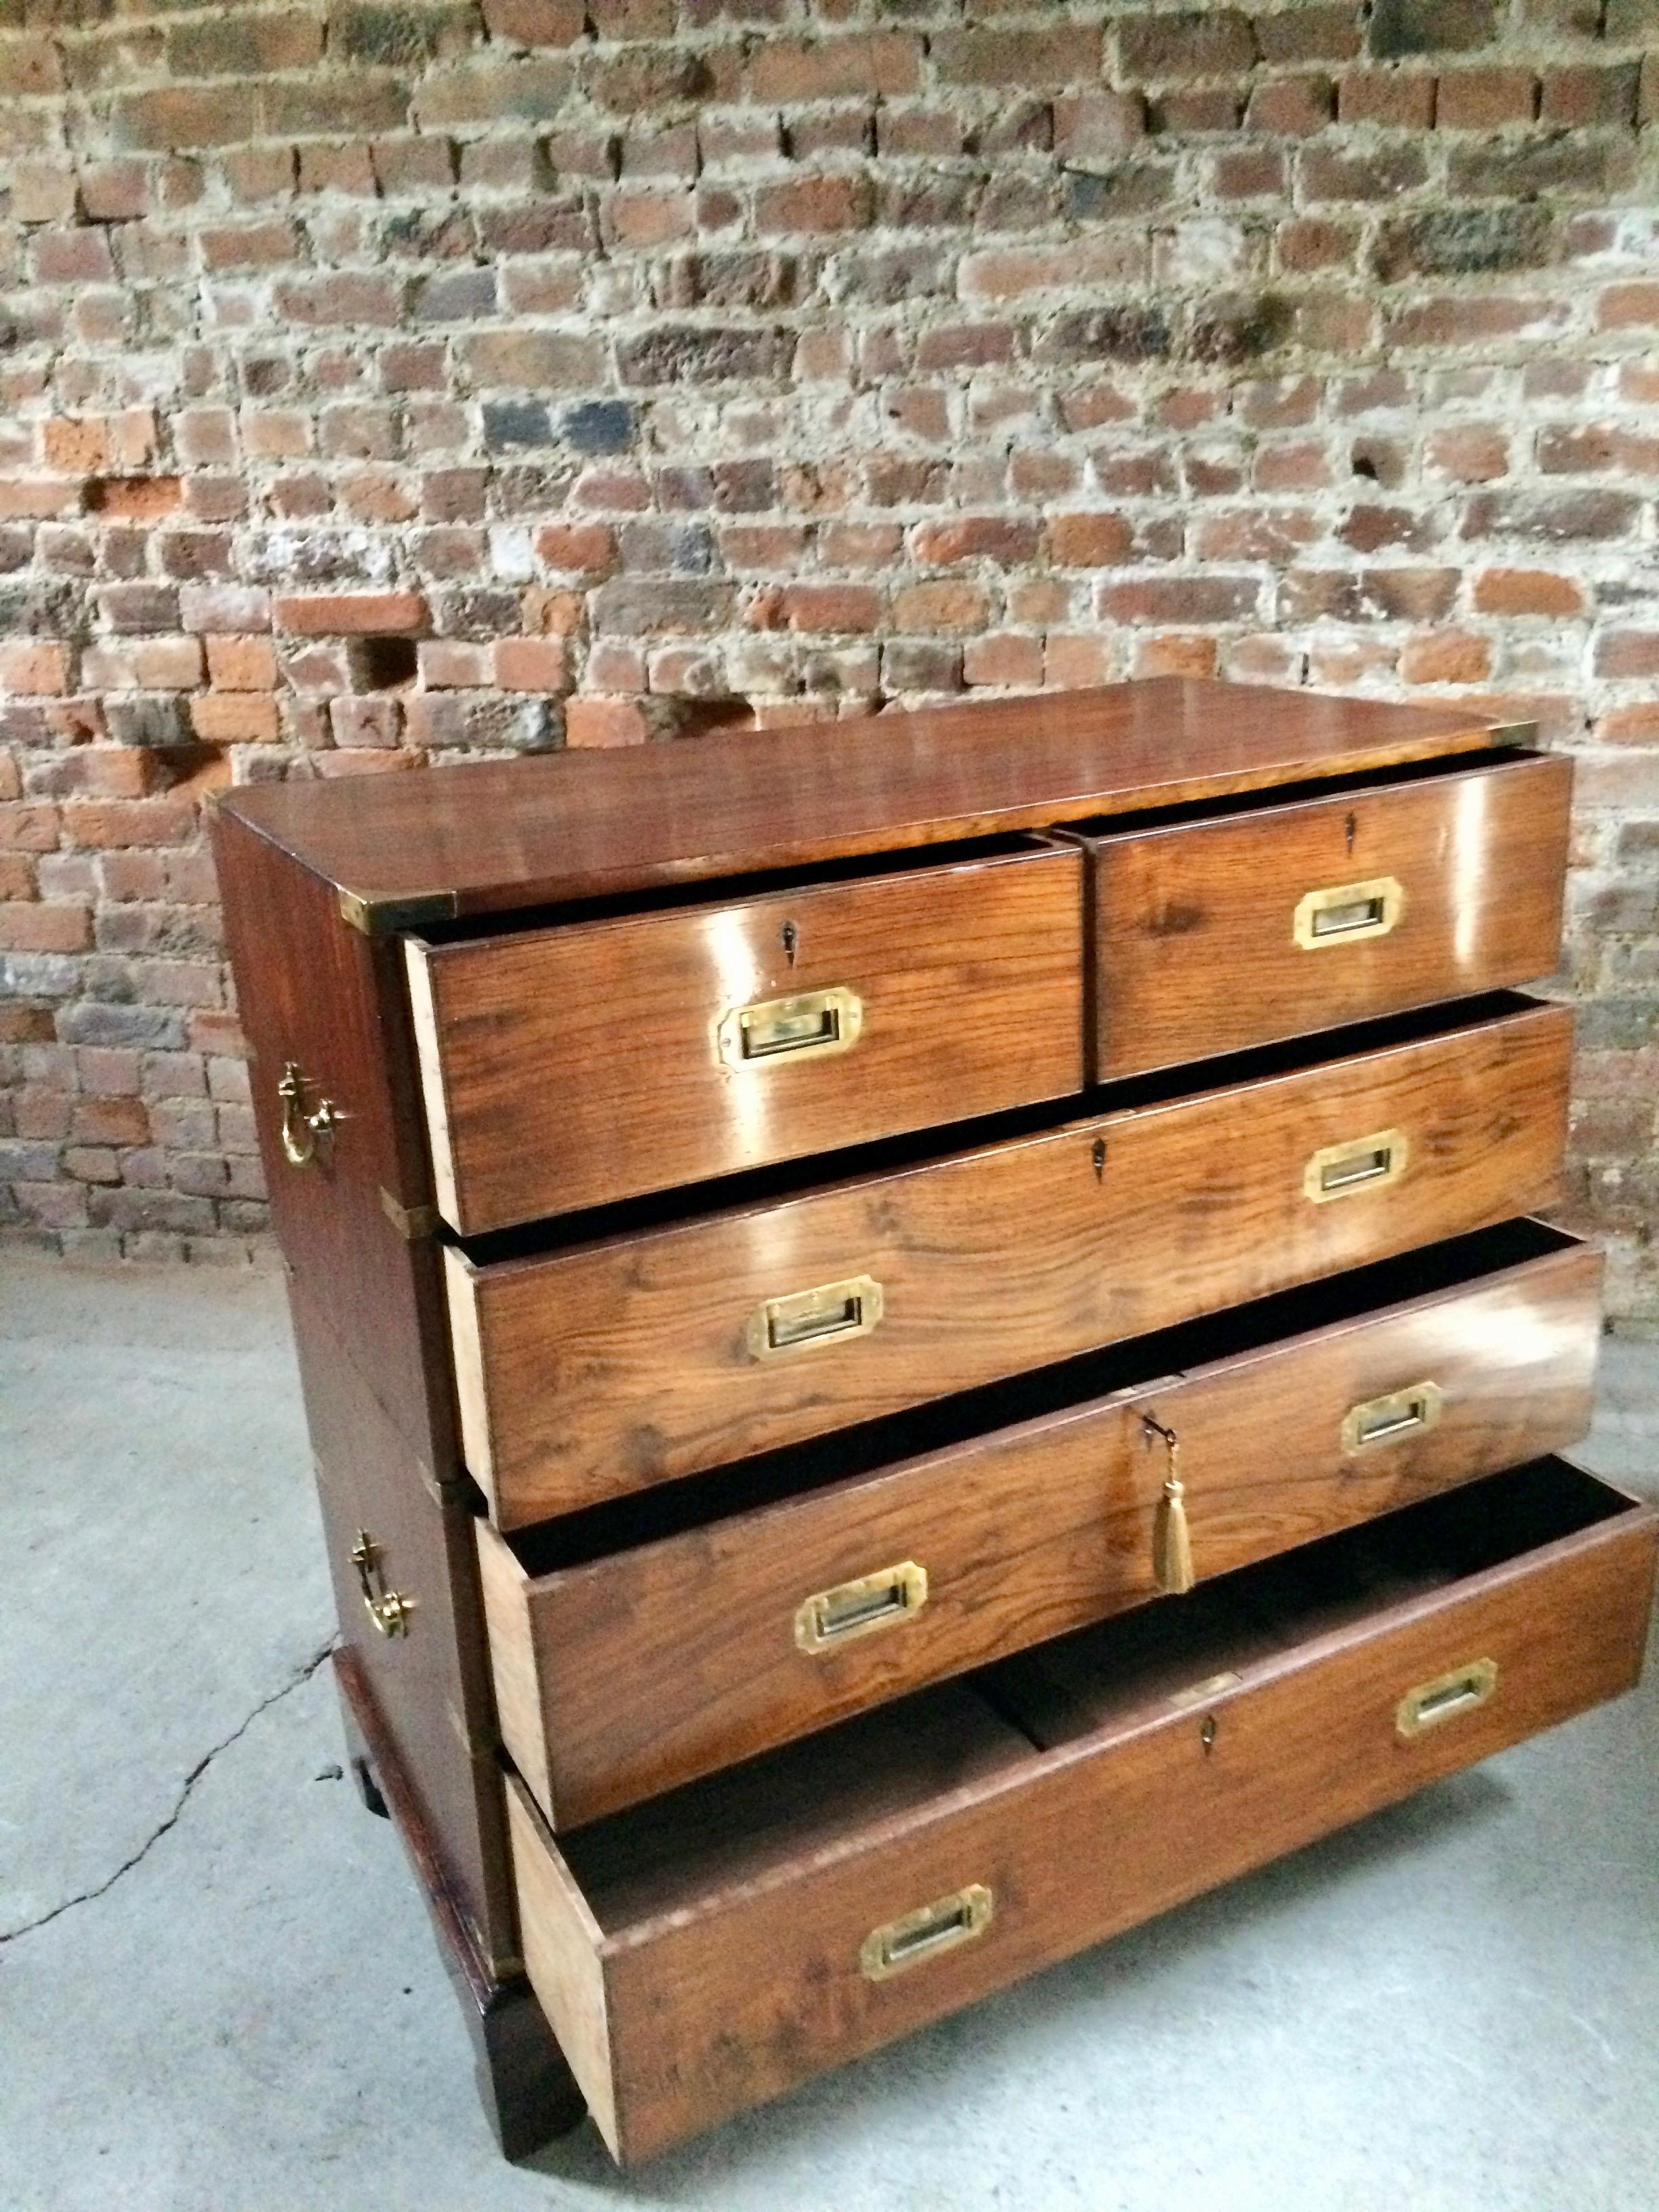 Brass Antique Campaign Chest of Drawers Dresser Mahogany circa 1860 Victorian No.4